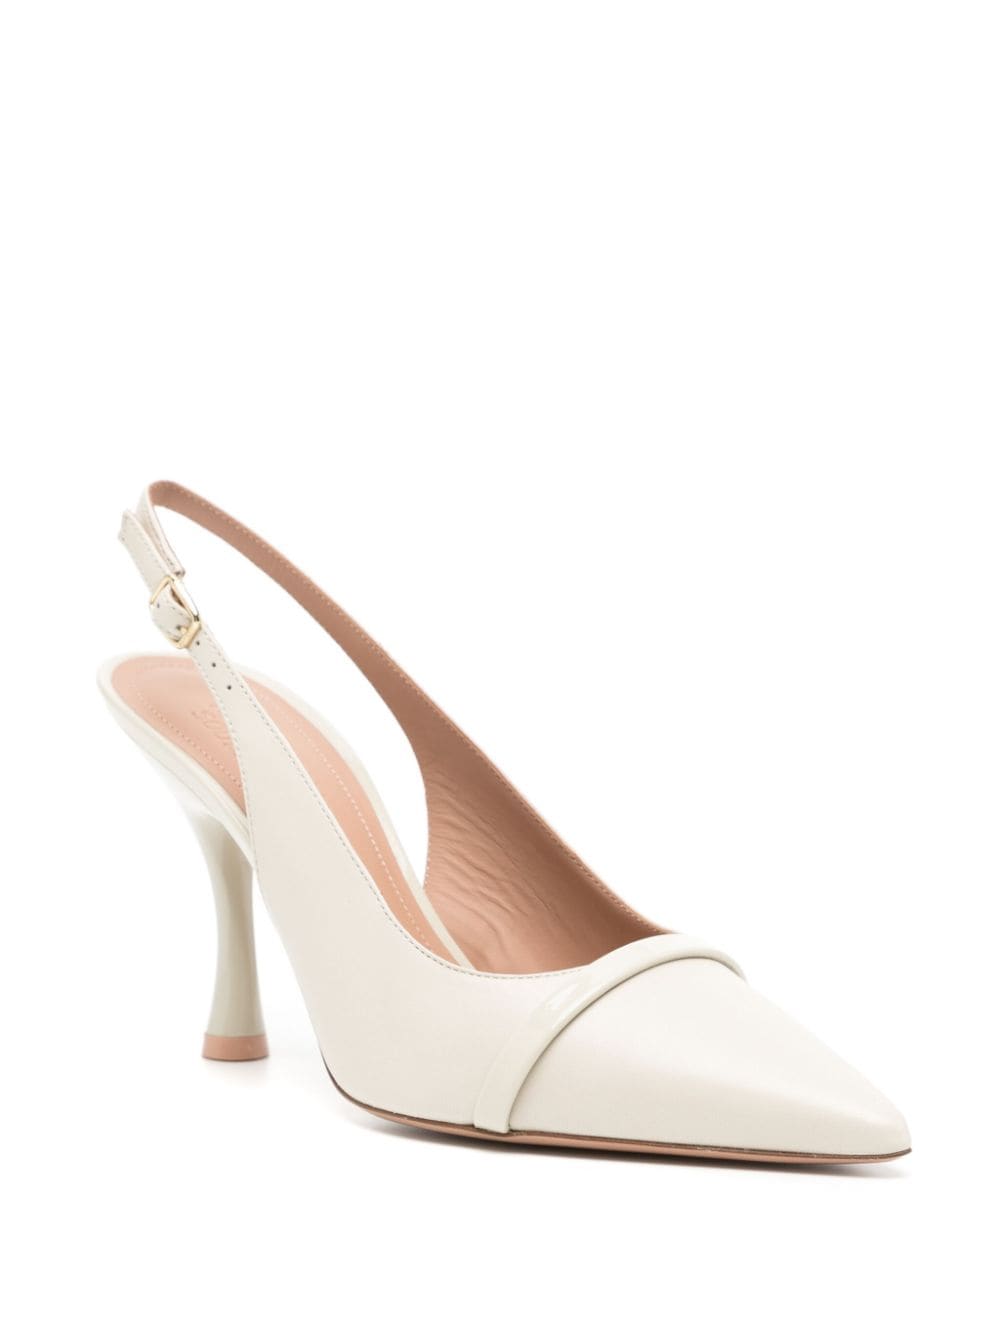 Malone Souliers Marion 85mm leather pumps - Beige